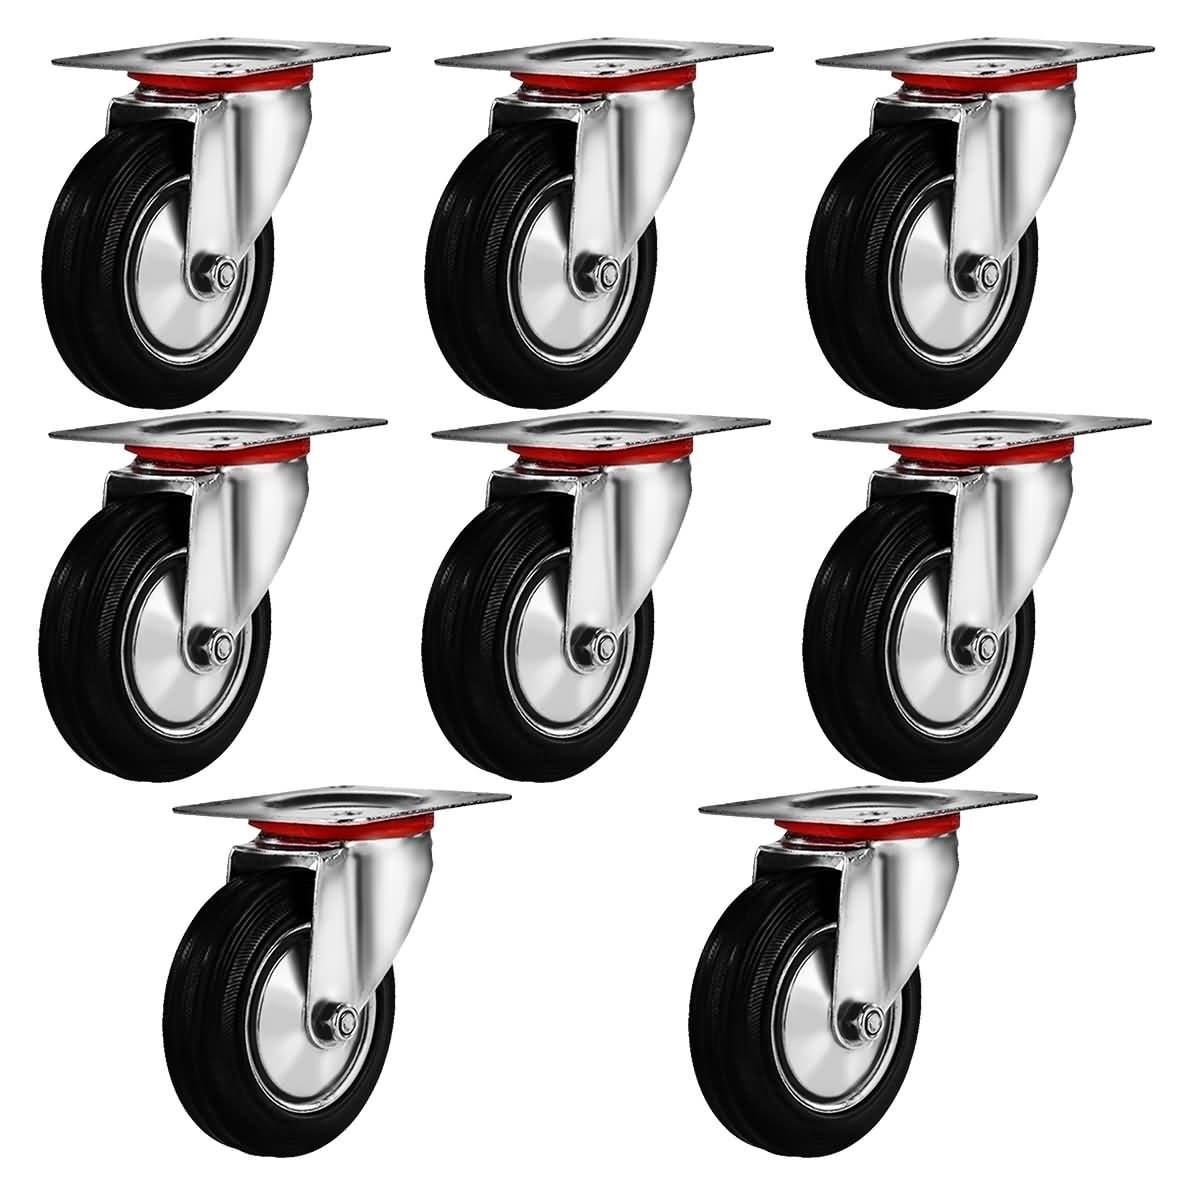 8pack 3" Swivel Caster Wheels Rubber Base With Top Plate & Bearing Heavy Duty US for sale online 